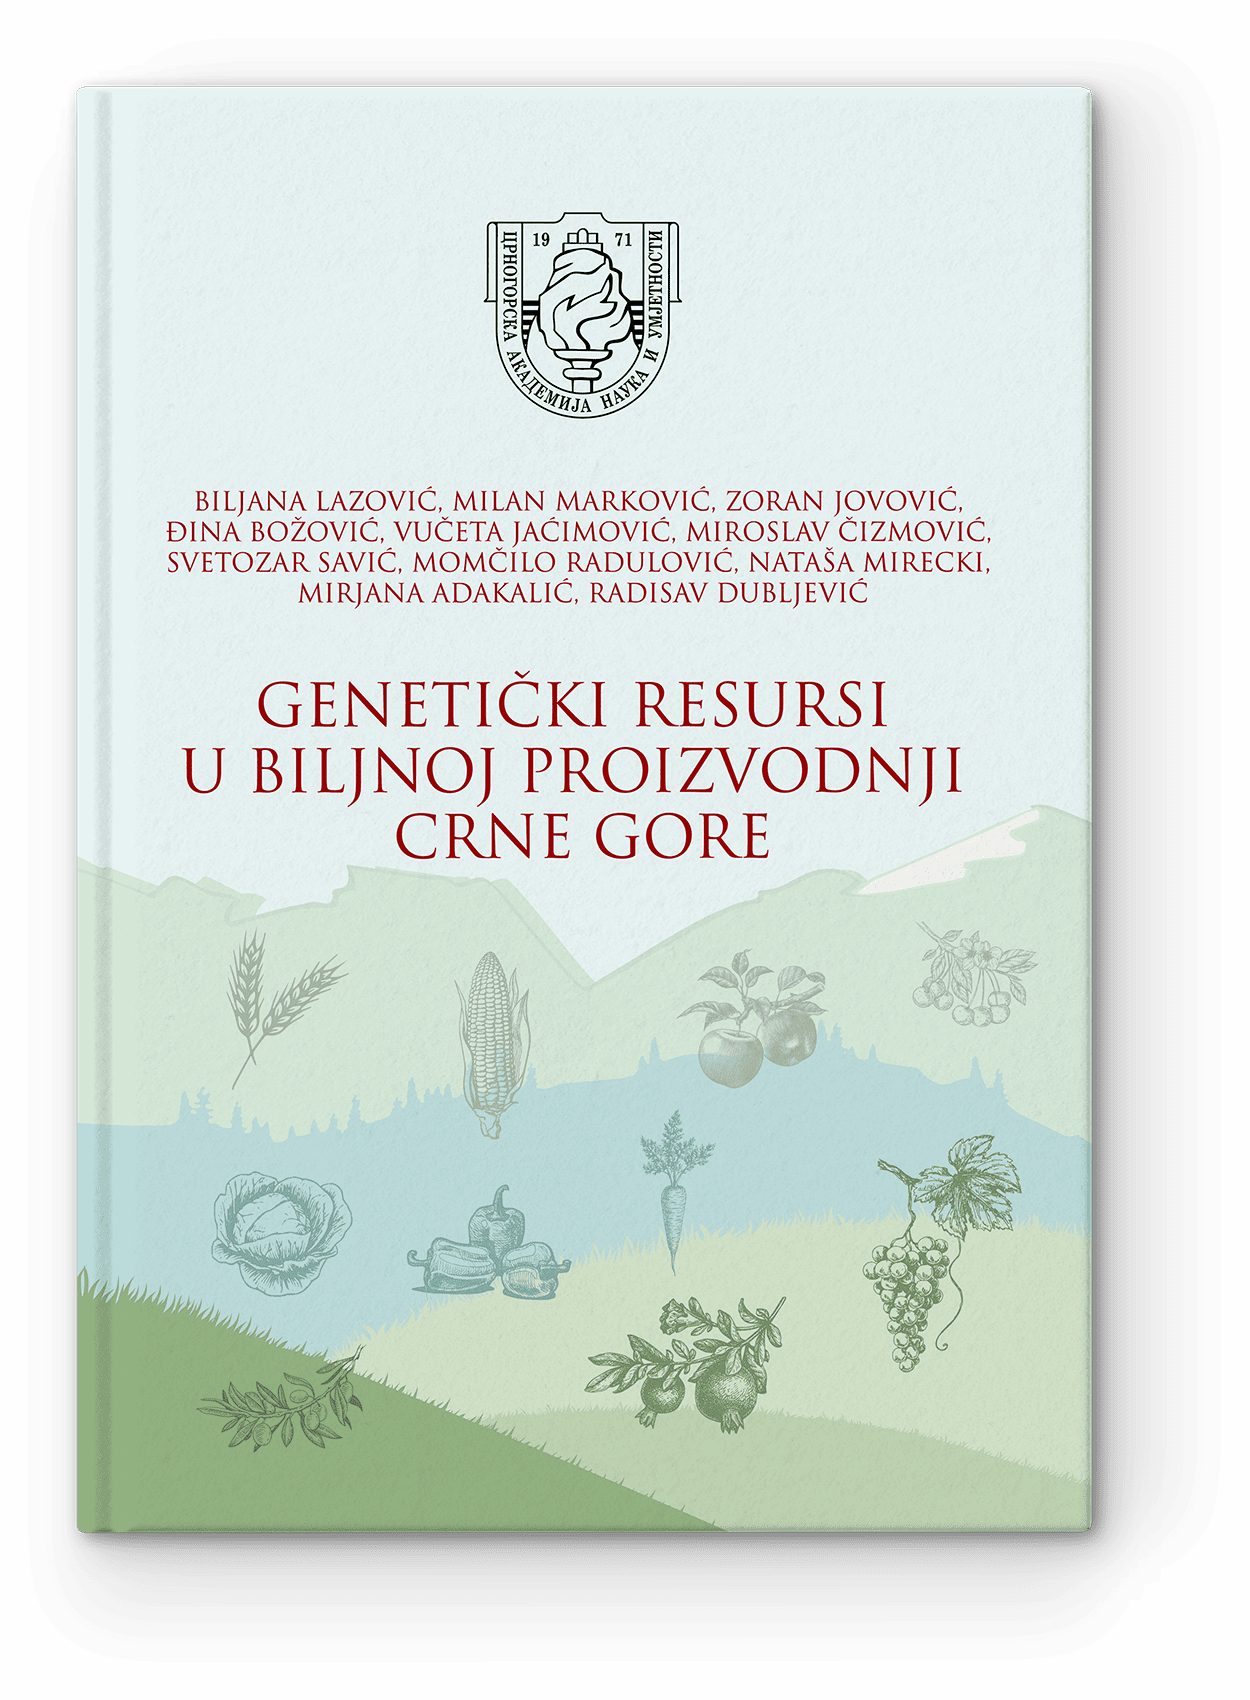 Genetic Resources in Plant Production of Montenegro